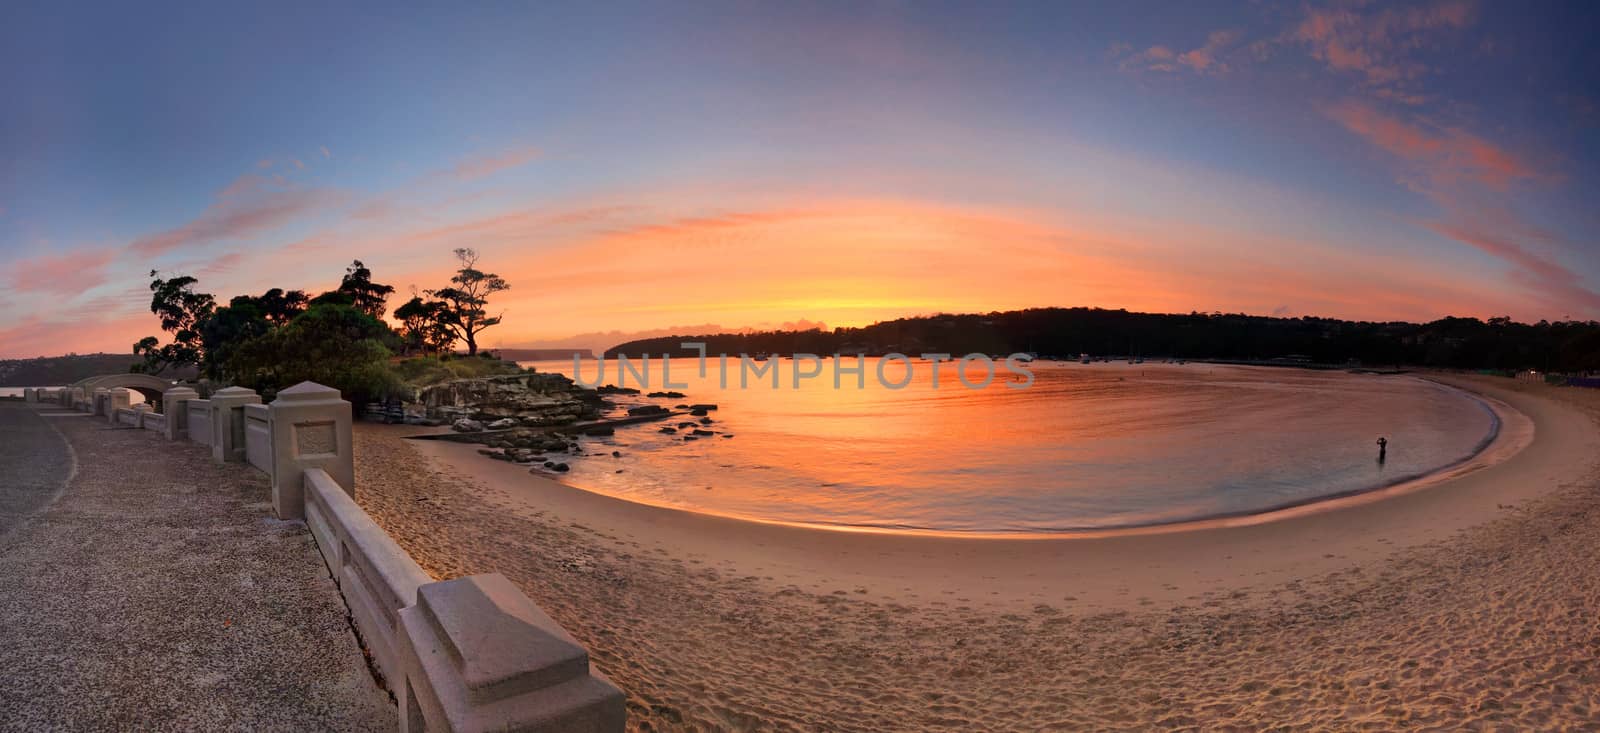 Sunrise at beautiful Balmoral Beach, Mosman, Sydney, Australia, with Rocky Point Island to the left which is accessed by the stone arch bridge. You can see the heads in the very far distance.    Please note this is a stitched panorama taken just before sunrise and the difficulty with this one was the waves constantly breaking at shoreline.